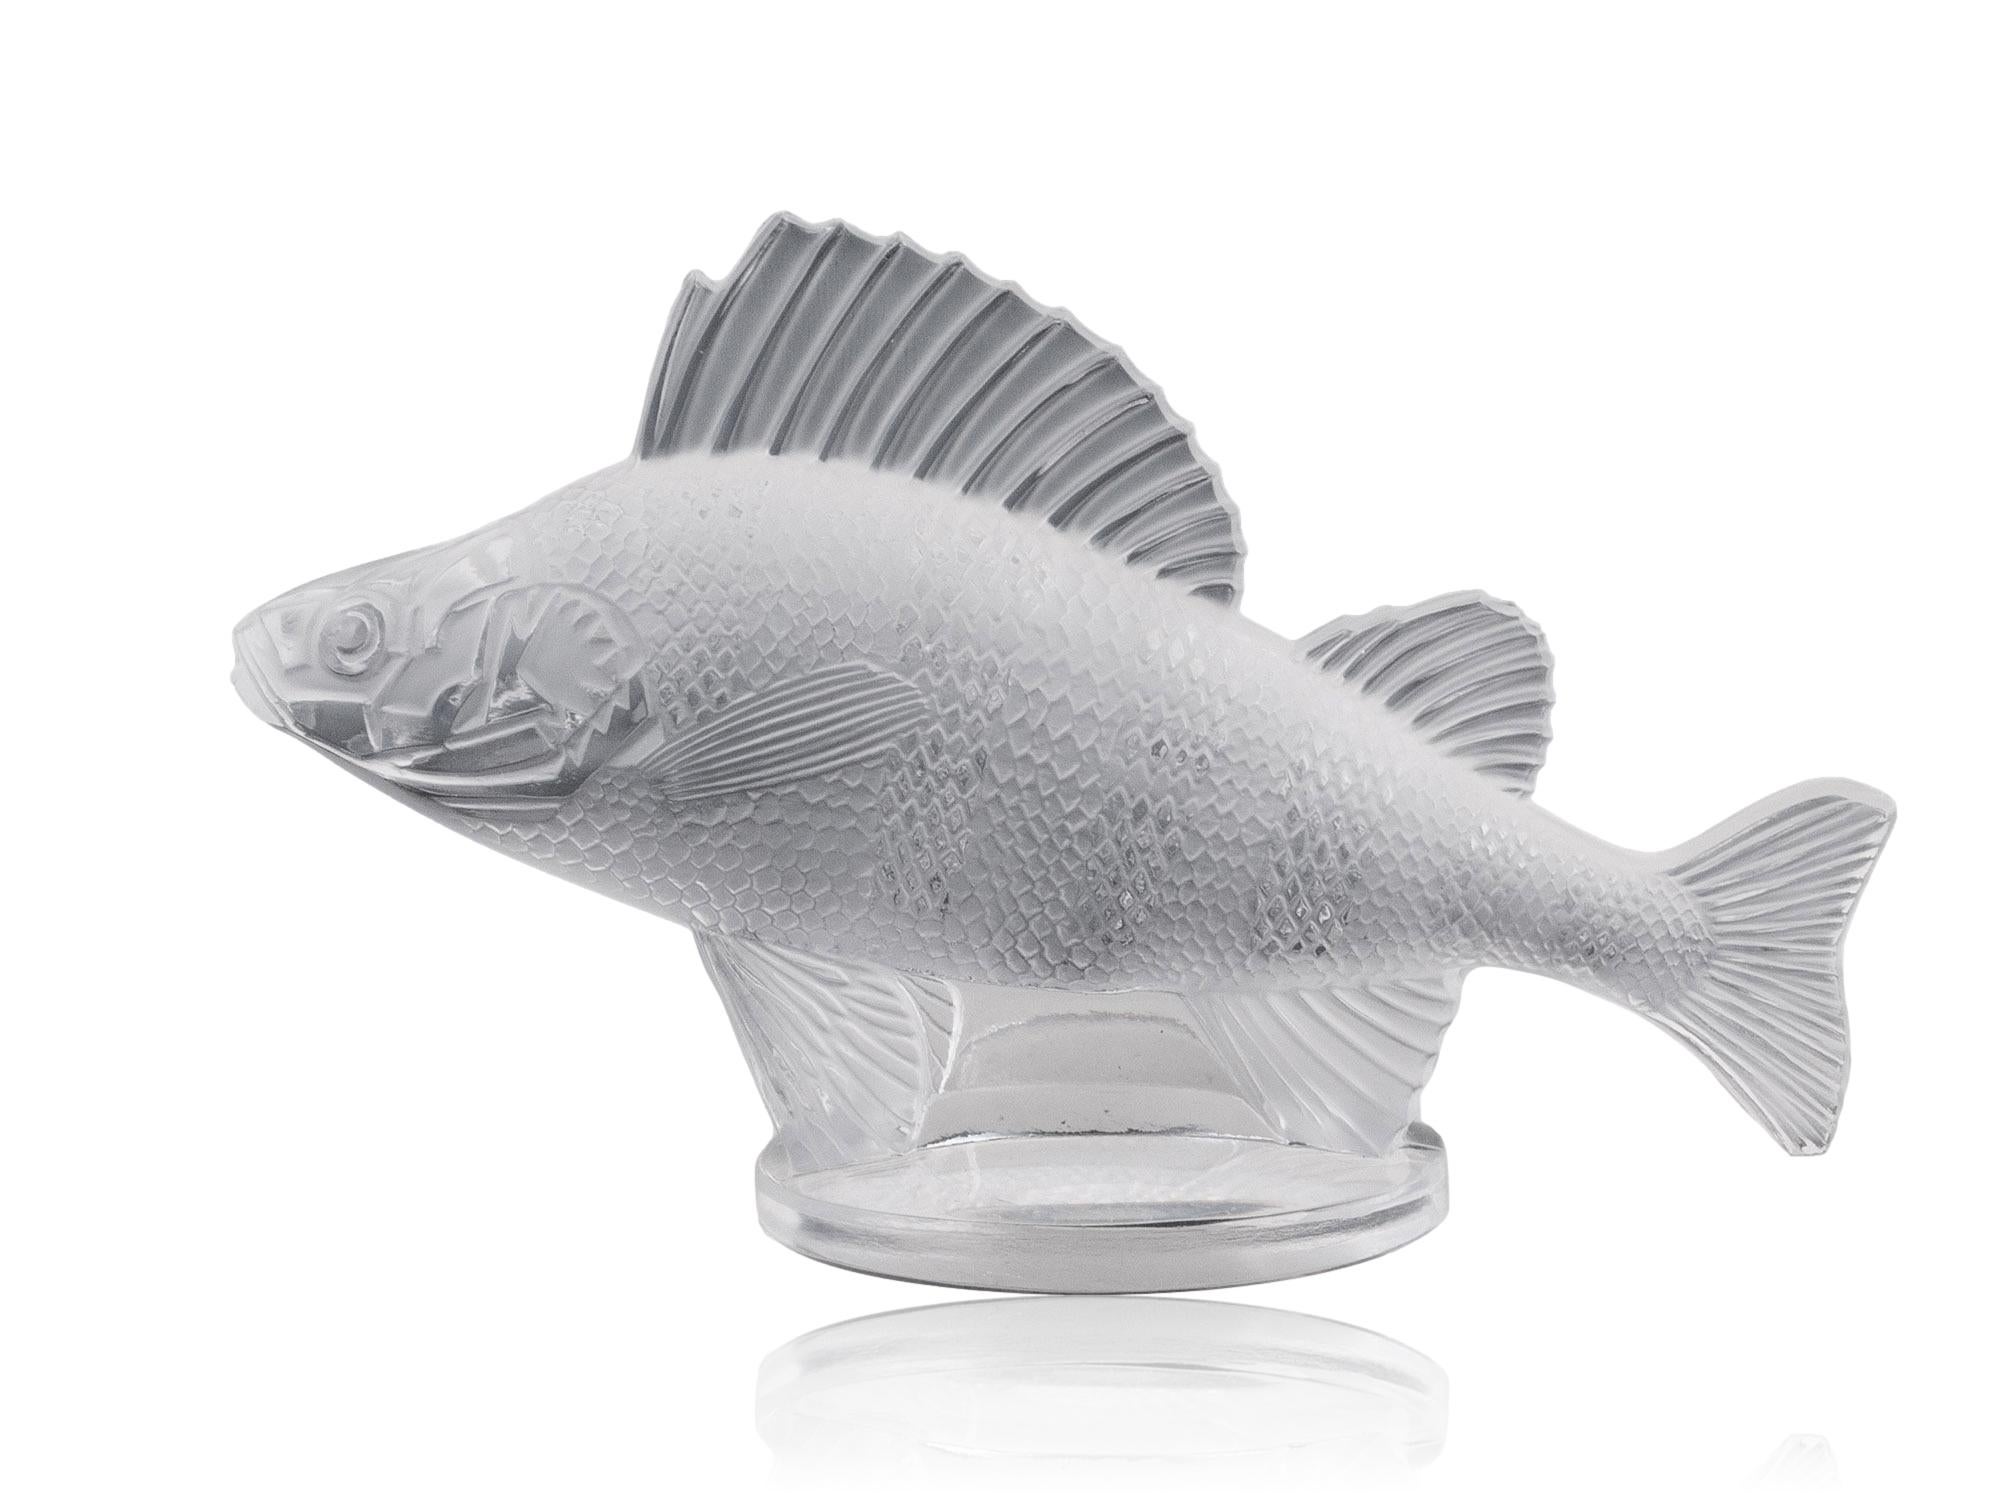 Rene Lalique Original Car Mascot

From our Lalique collection, we are delighted to offer the Rene Lalique Perche Poisson Car Mascot. The Car Mascot modelled from Rene Lalique's original catalogue of hood ornaments model number #1158 Perche or Perch.